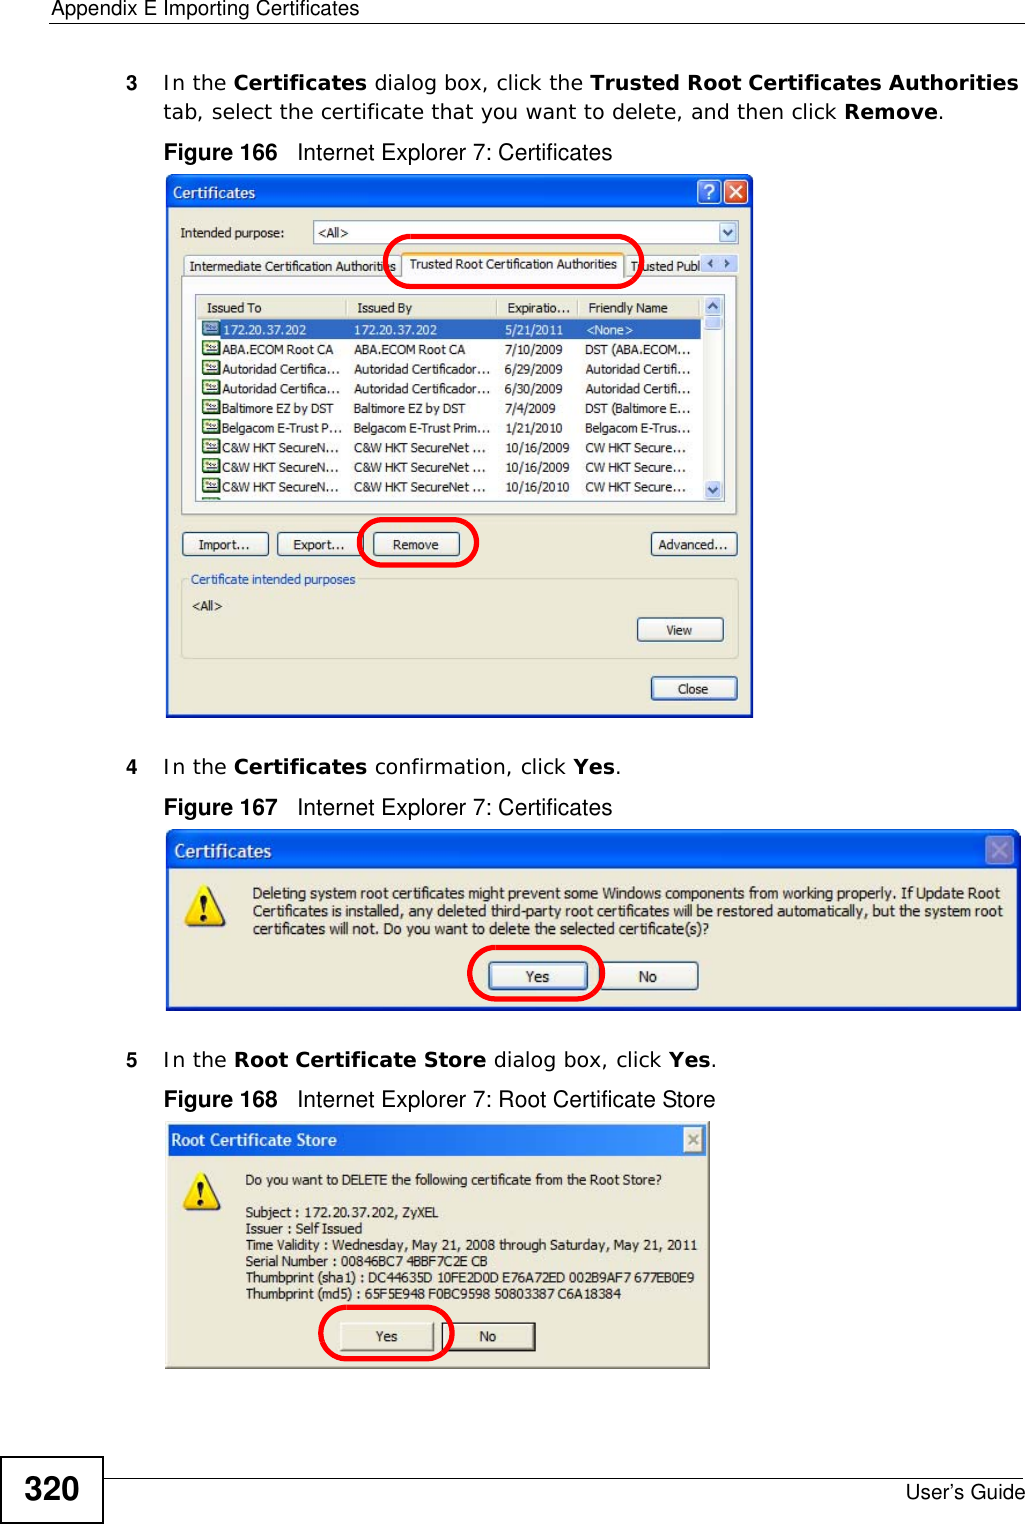 Appendix E Importing CertificatesUser’s Guide3203In the Certificates dialog box, click the Trusted Root Certificates Authorities tab, select the certificate that you want to delete, and then click Remove.Figure 166   Internet Explorer 7: Certificates4In the Certificates confirmation, click Yes.Figure 167   Internet Explorer 7: Certificates5In the Root Certificate Store dialog box, click Yes.Figure 168   Internet Explorer 7: Root Certificate Store